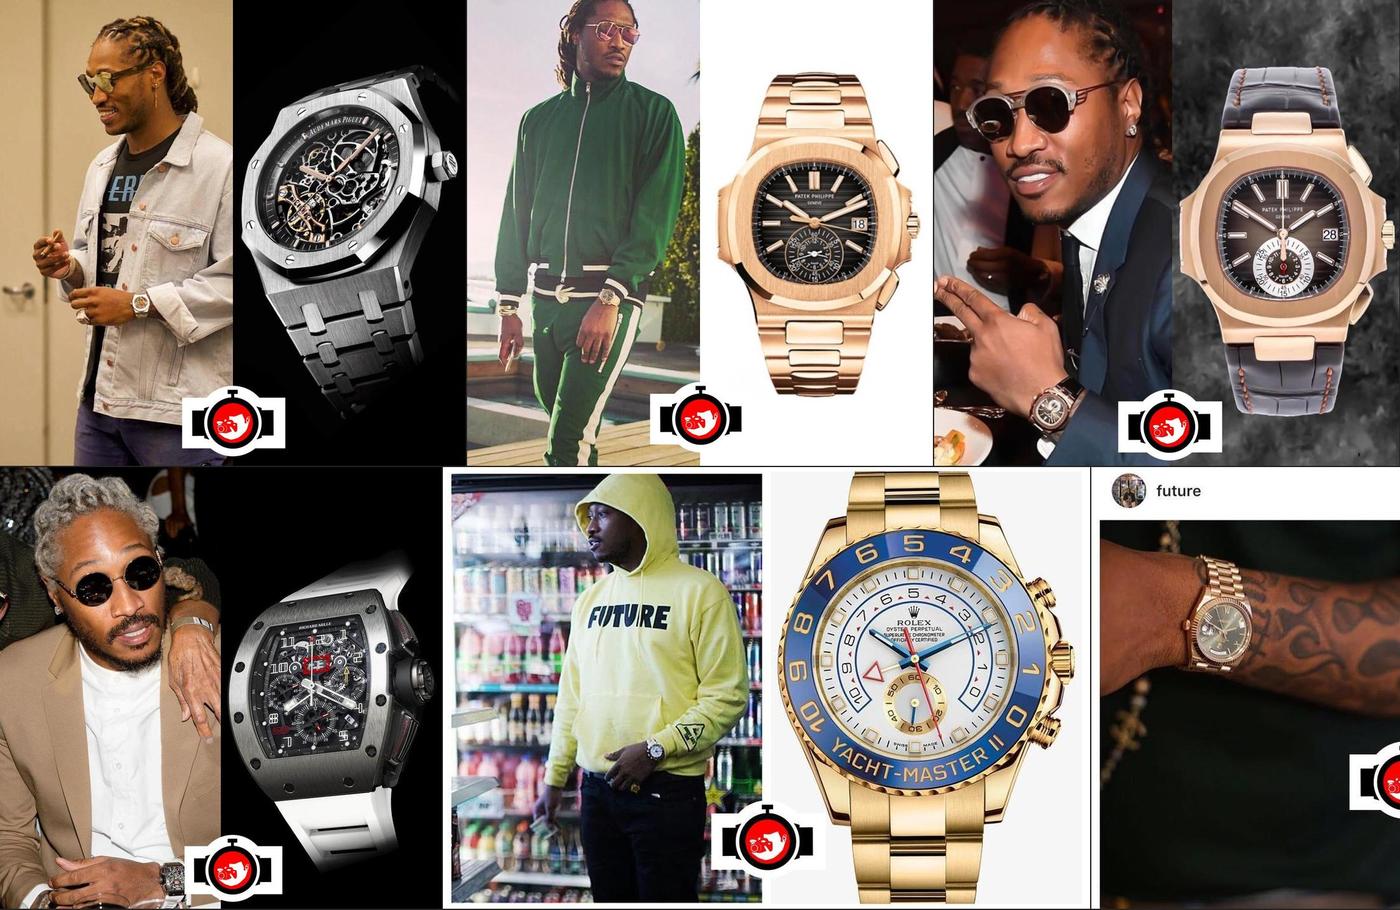 Future - Find out Future watch collection